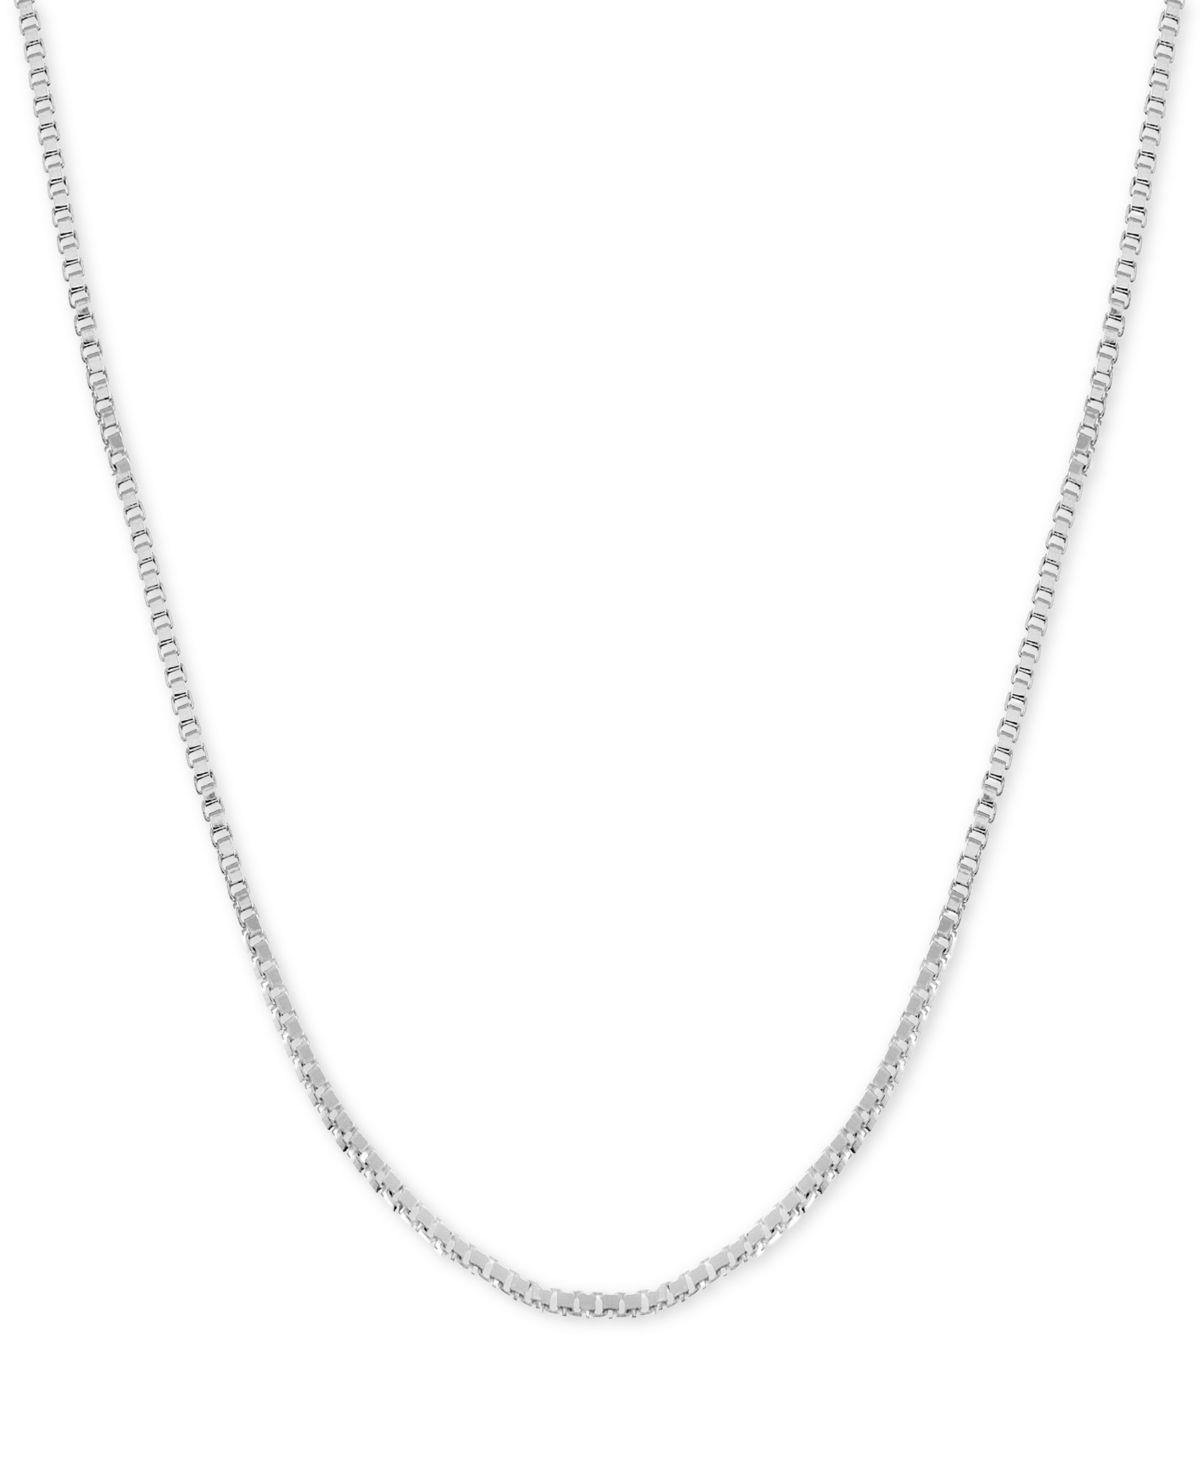 Silver Plated Box Link 24" Chain Necklace - Silver